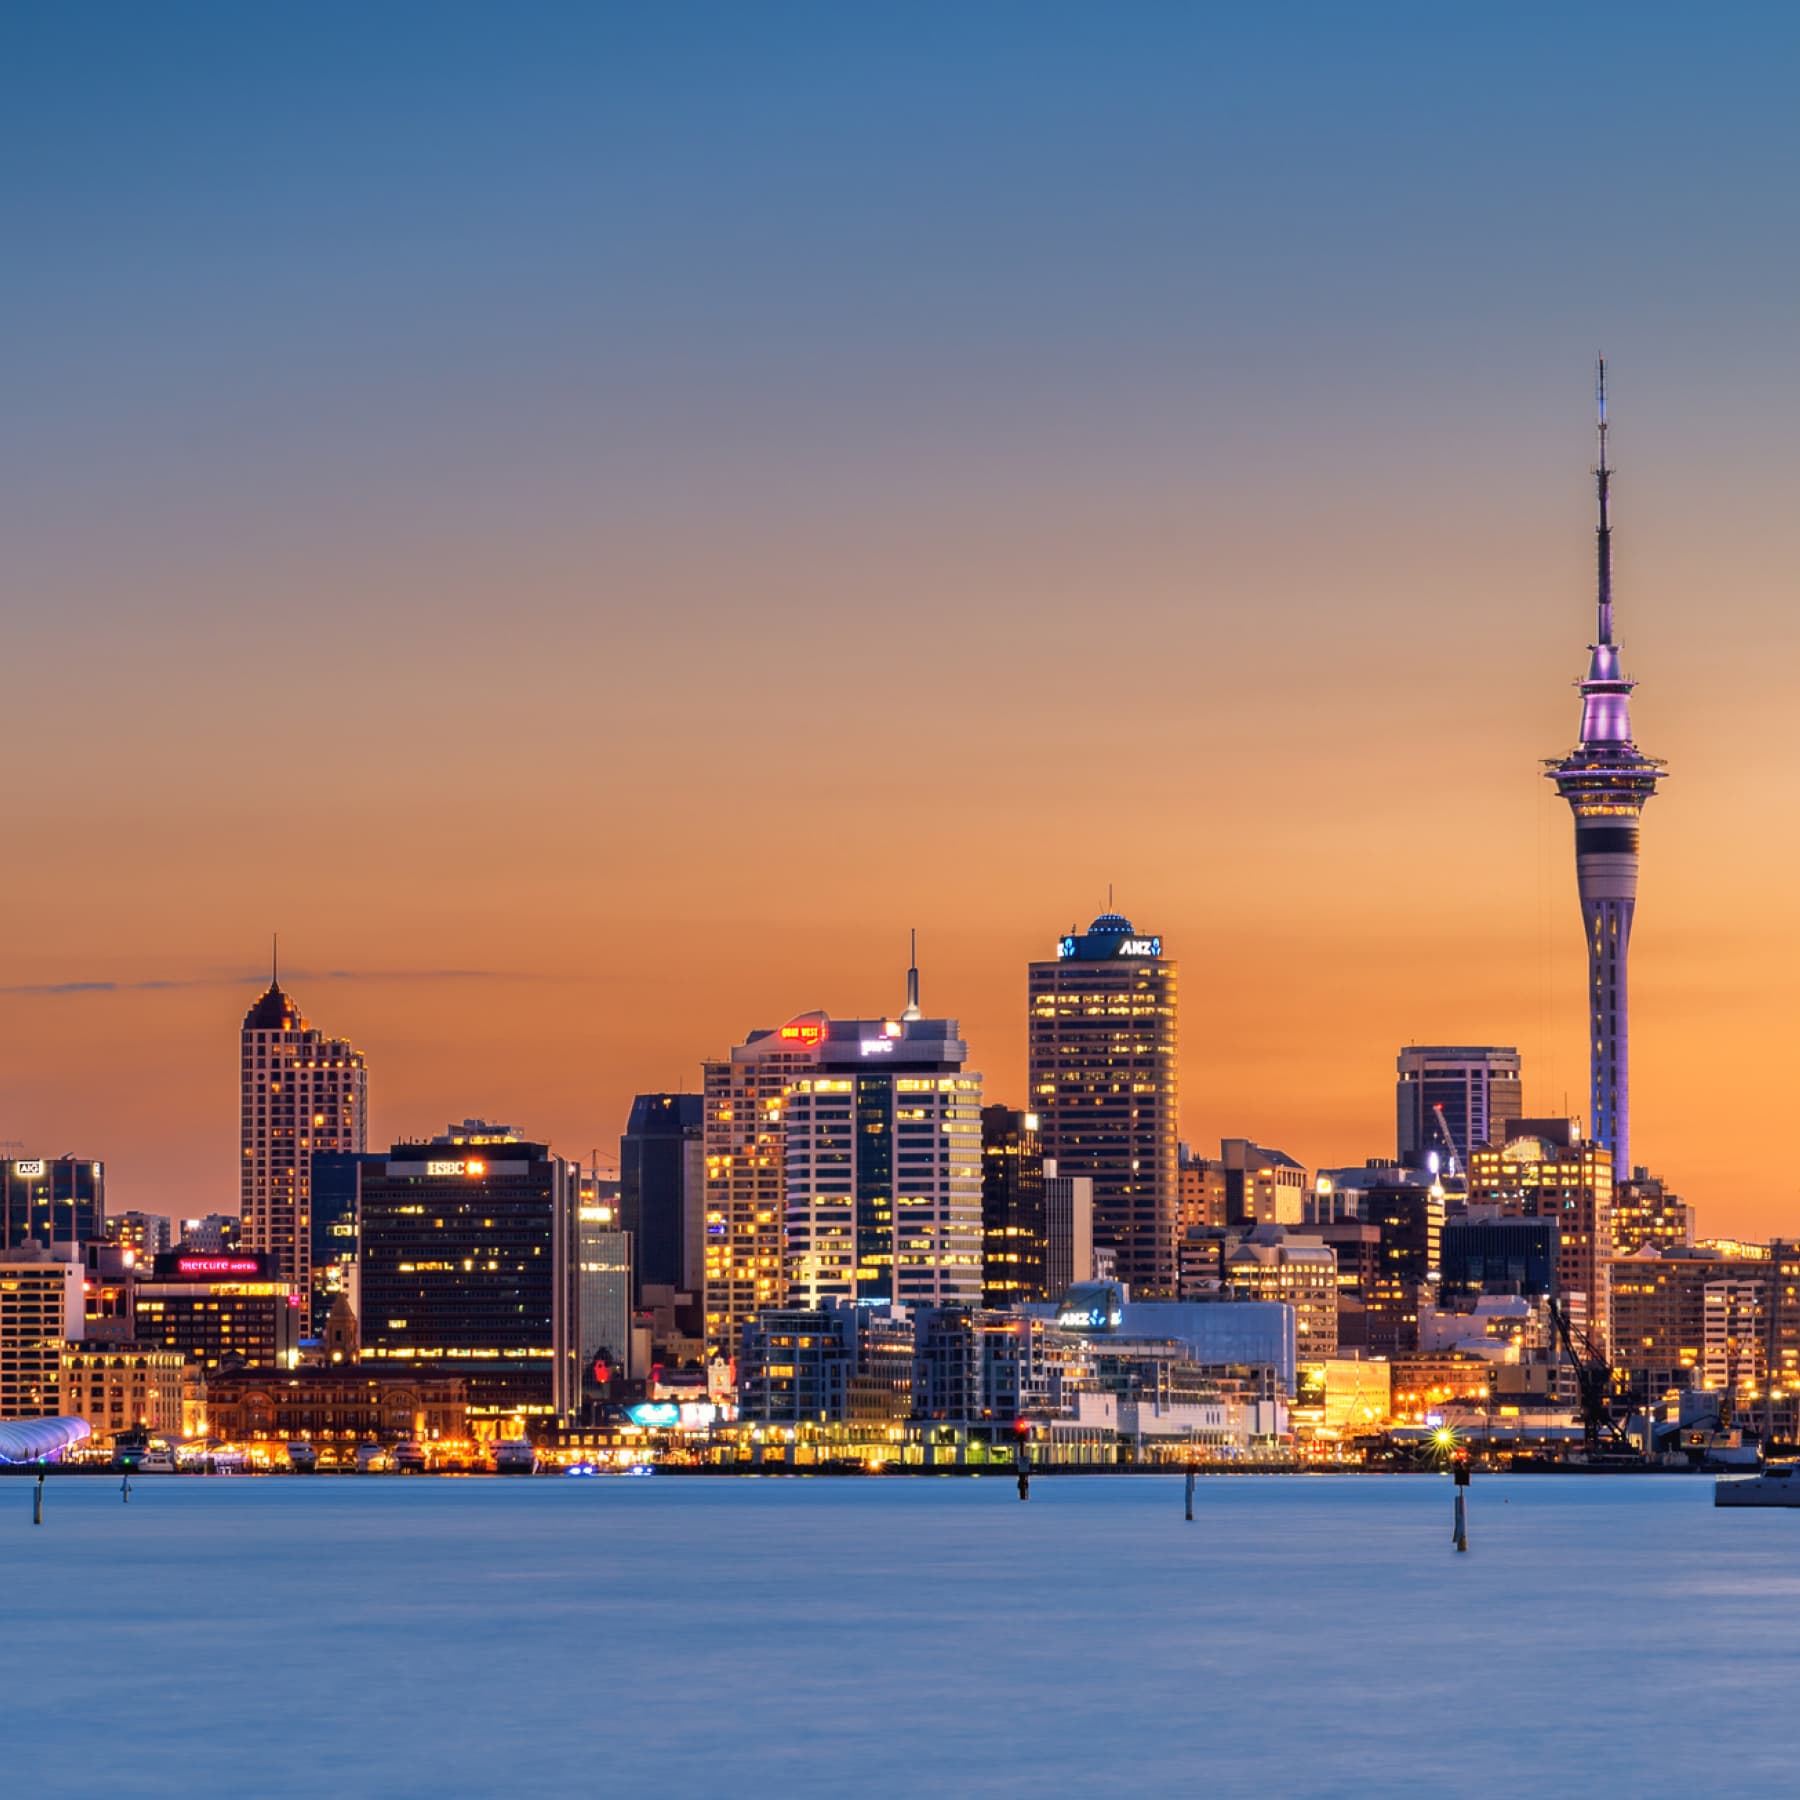 Auckland is one of the best places to visit in 2023